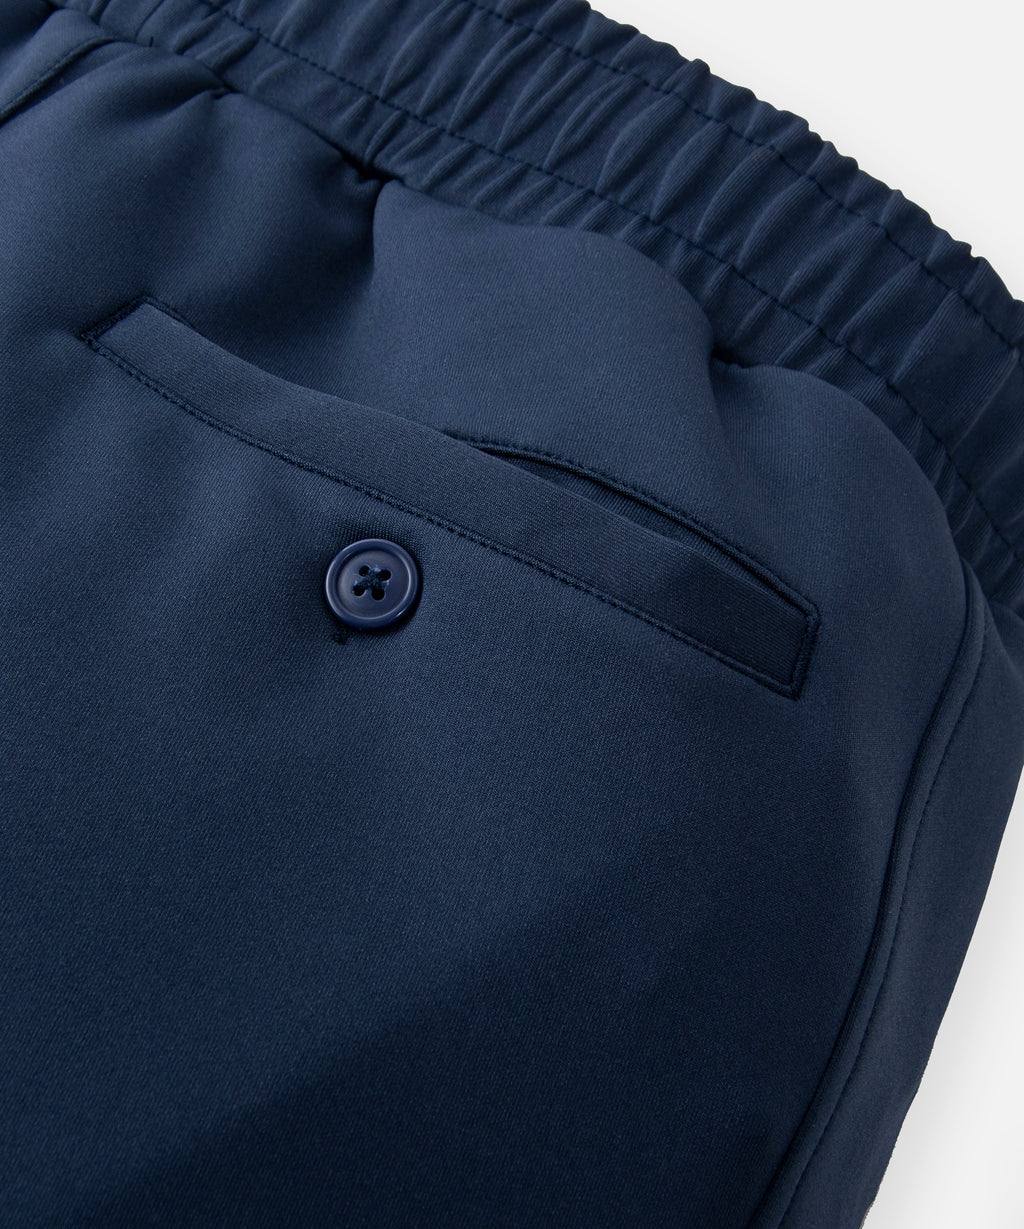  Single welt button-through back pocket on Paper Planes Slim Fit Chromatic Jogger color Naval Academy.